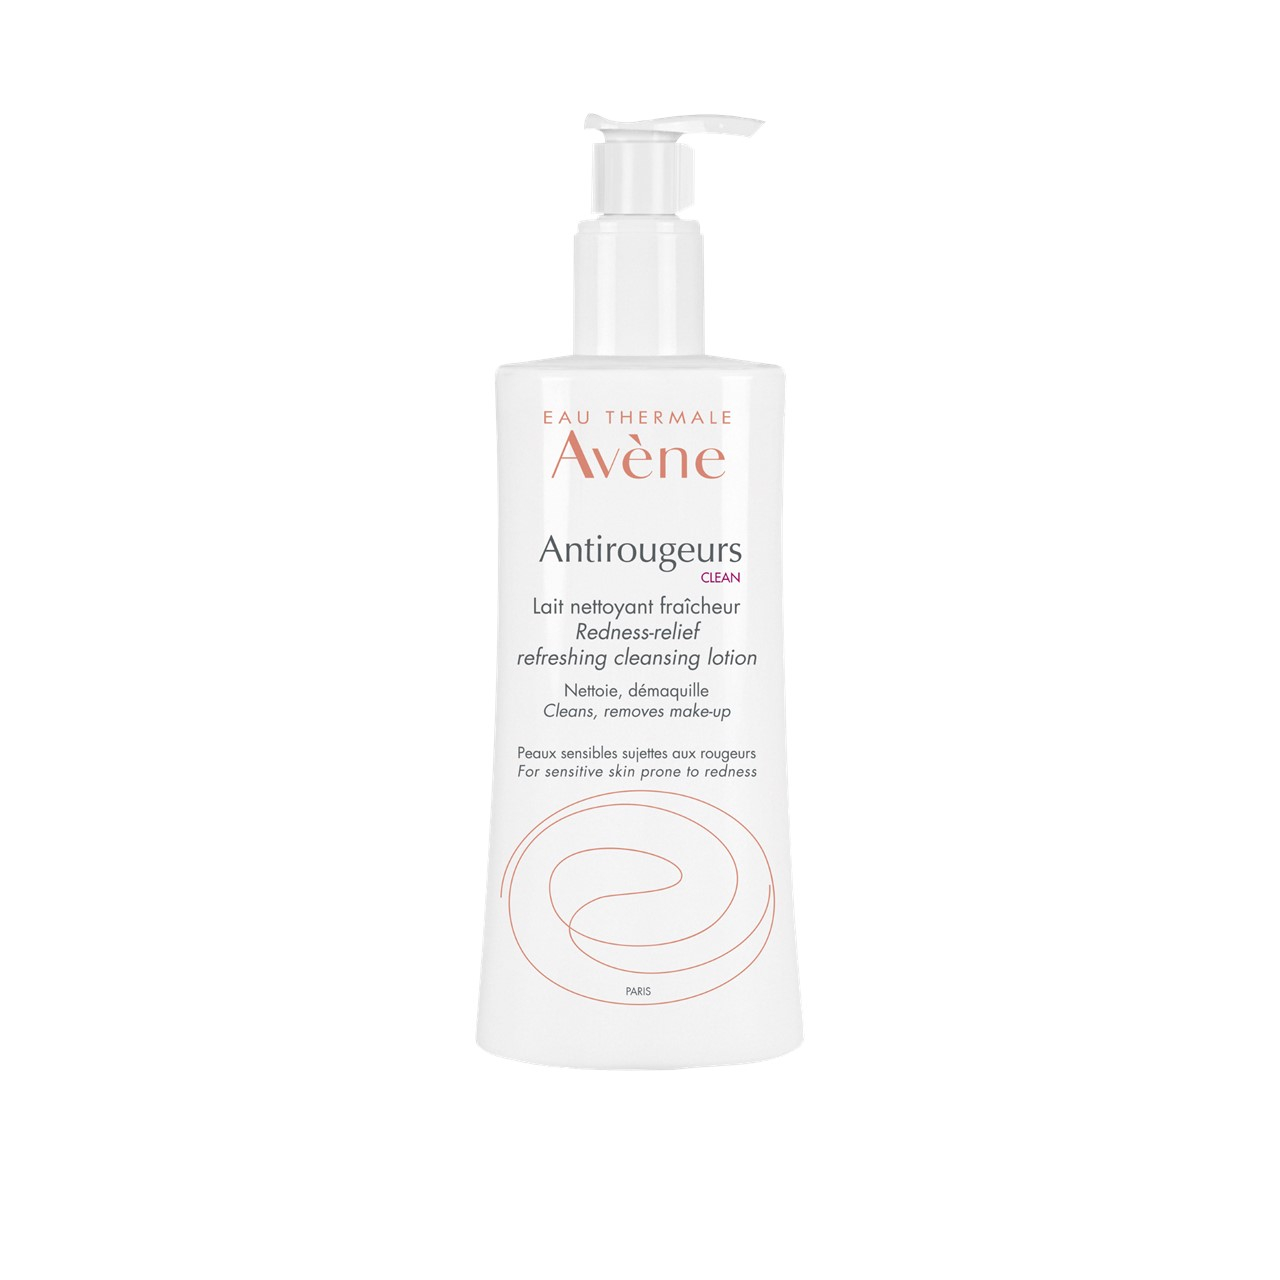 Avène Antirougeurs Clean Redness-Relief Cleansing Lotion 400ml (13.53fl oz)